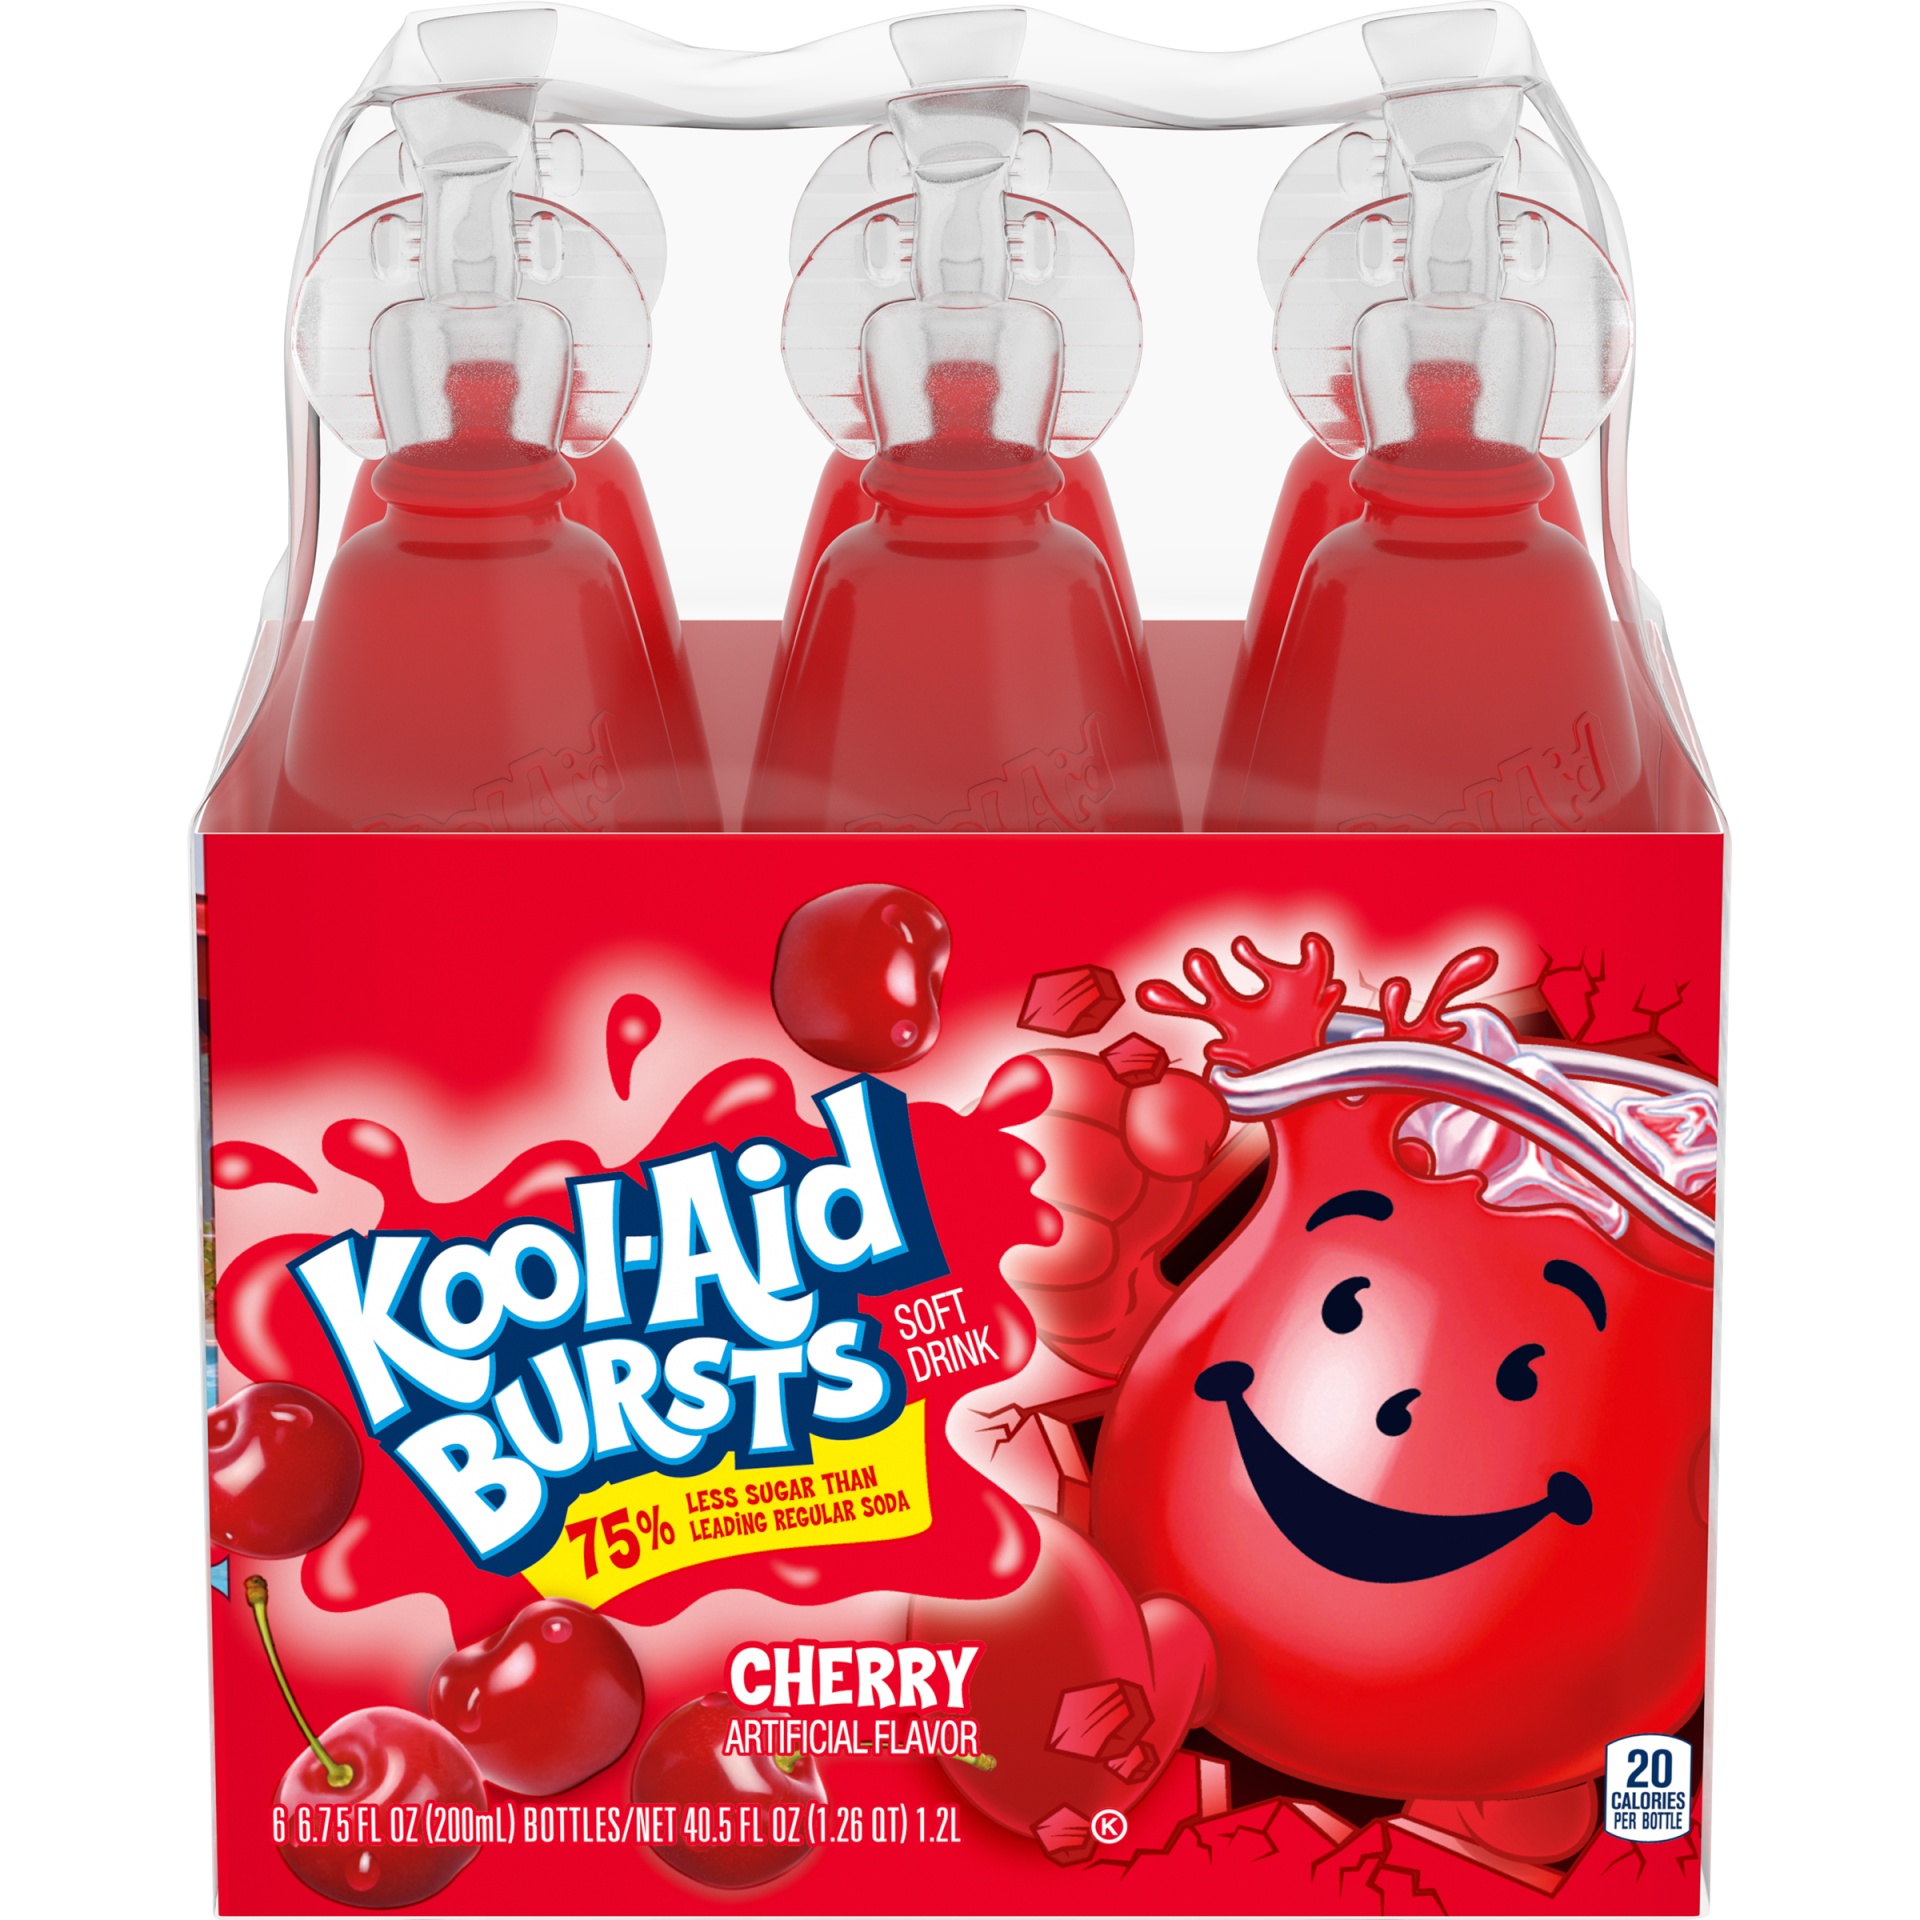 slide 1 of 10, Kool-Aid Bursts Cherry Artificially Flavored Soft Drink Pack, 6 ct; 6.75 oz